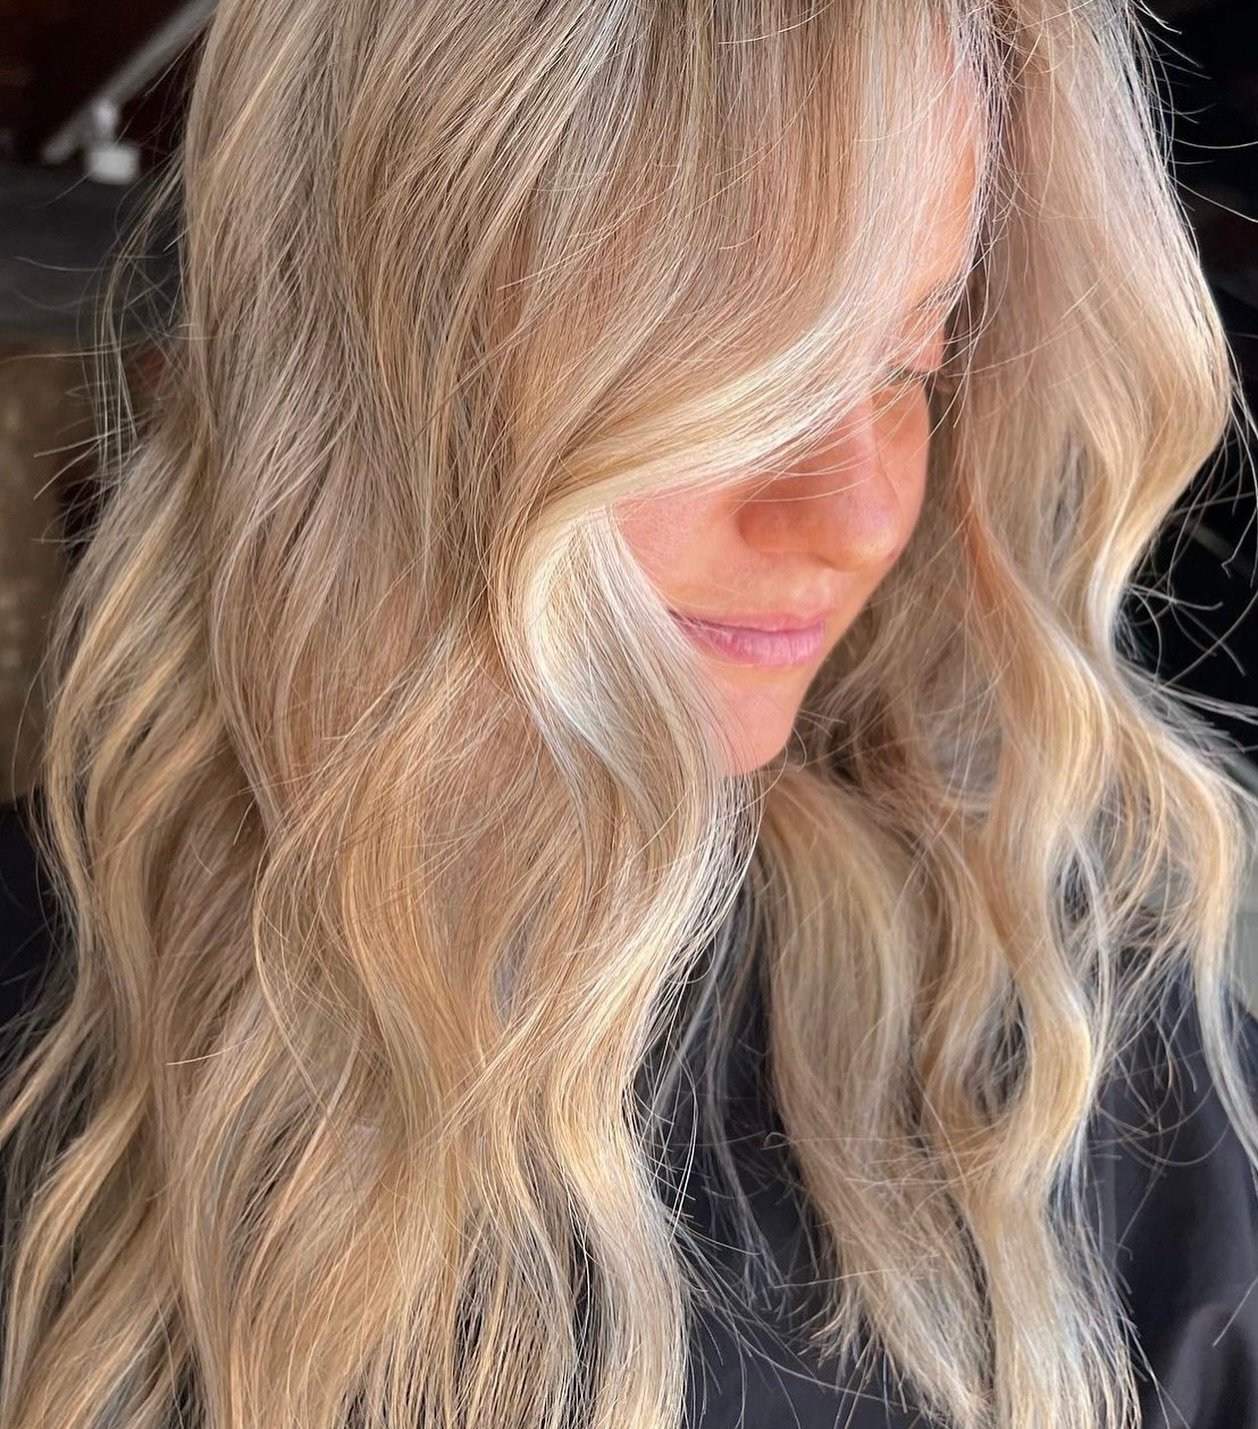 Introducing the Gigi special! Her technique in her Foilayage foils with the added tip out is honestly effortless! The perfect grow out for the clients that want the low maintenance grow out while being a bright blonde 

Coloured &amp; Styled @gigi.bo